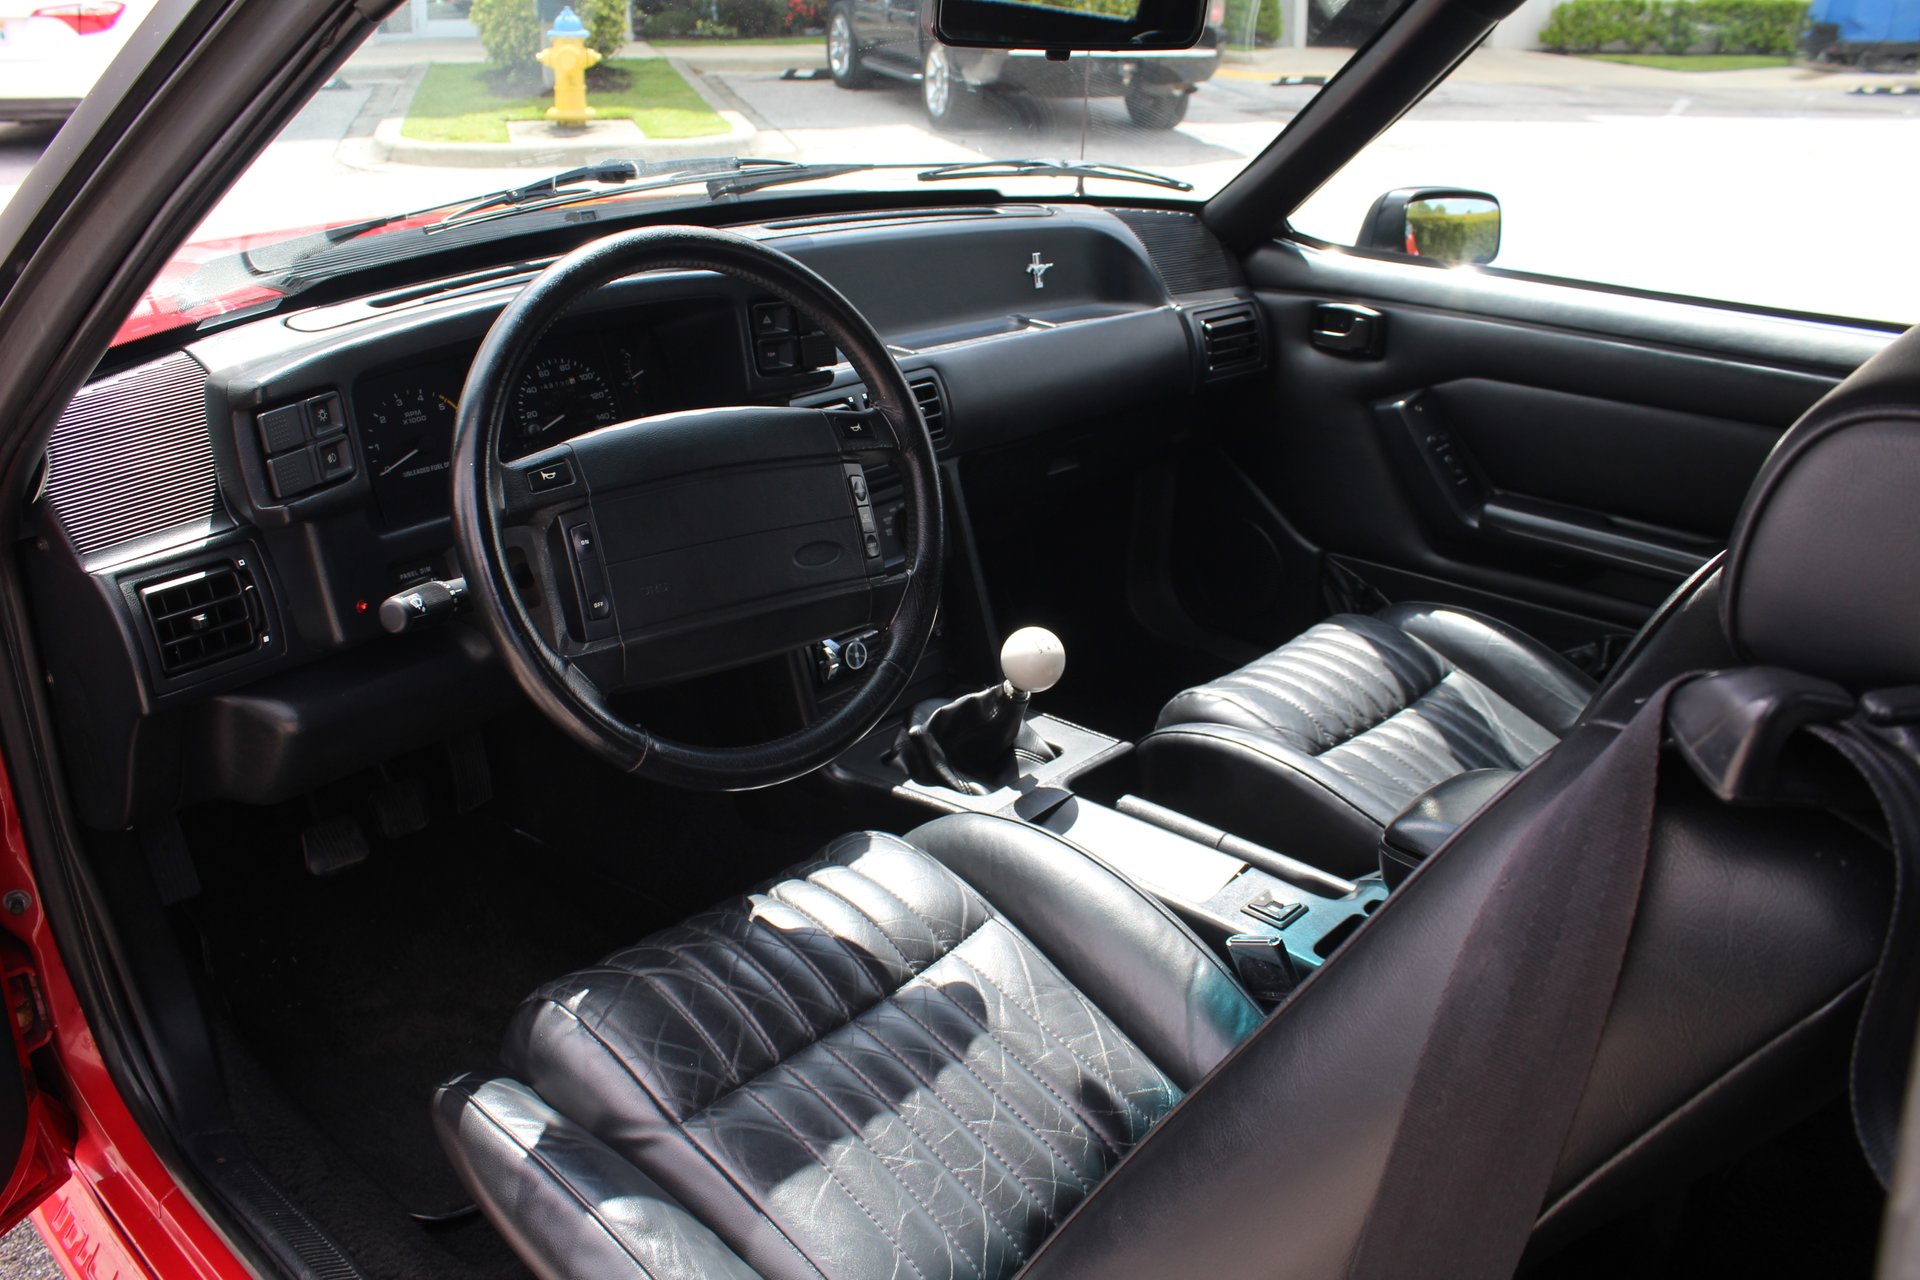 For Sale 1992 Ford Mustang Gt